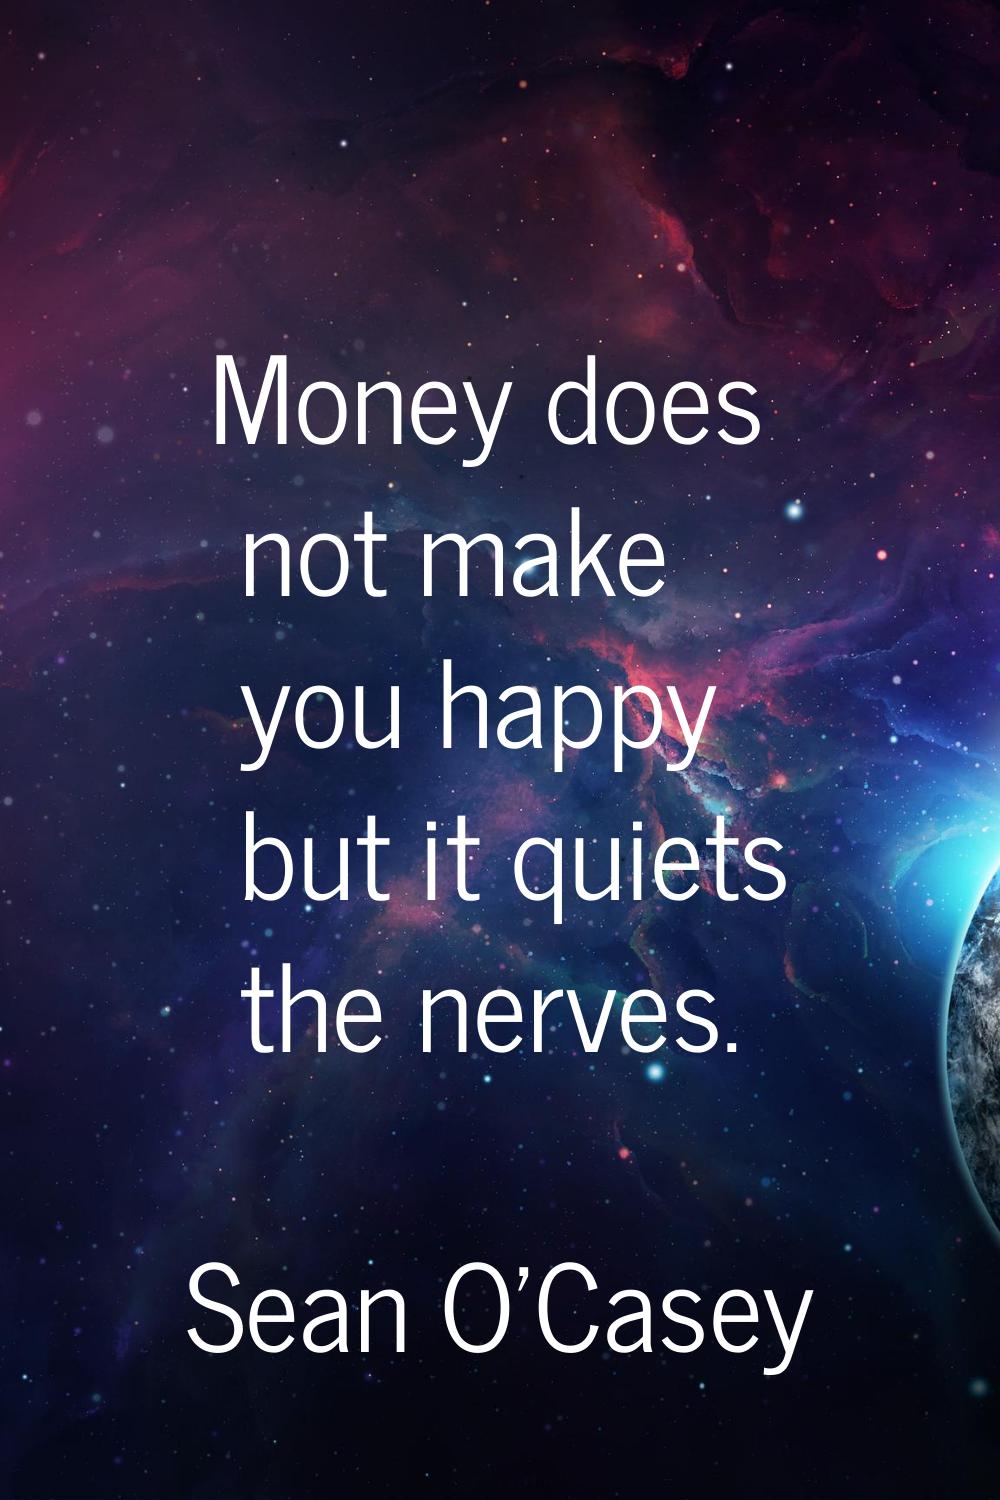 Money does not make you happy but it quiets the nerves.